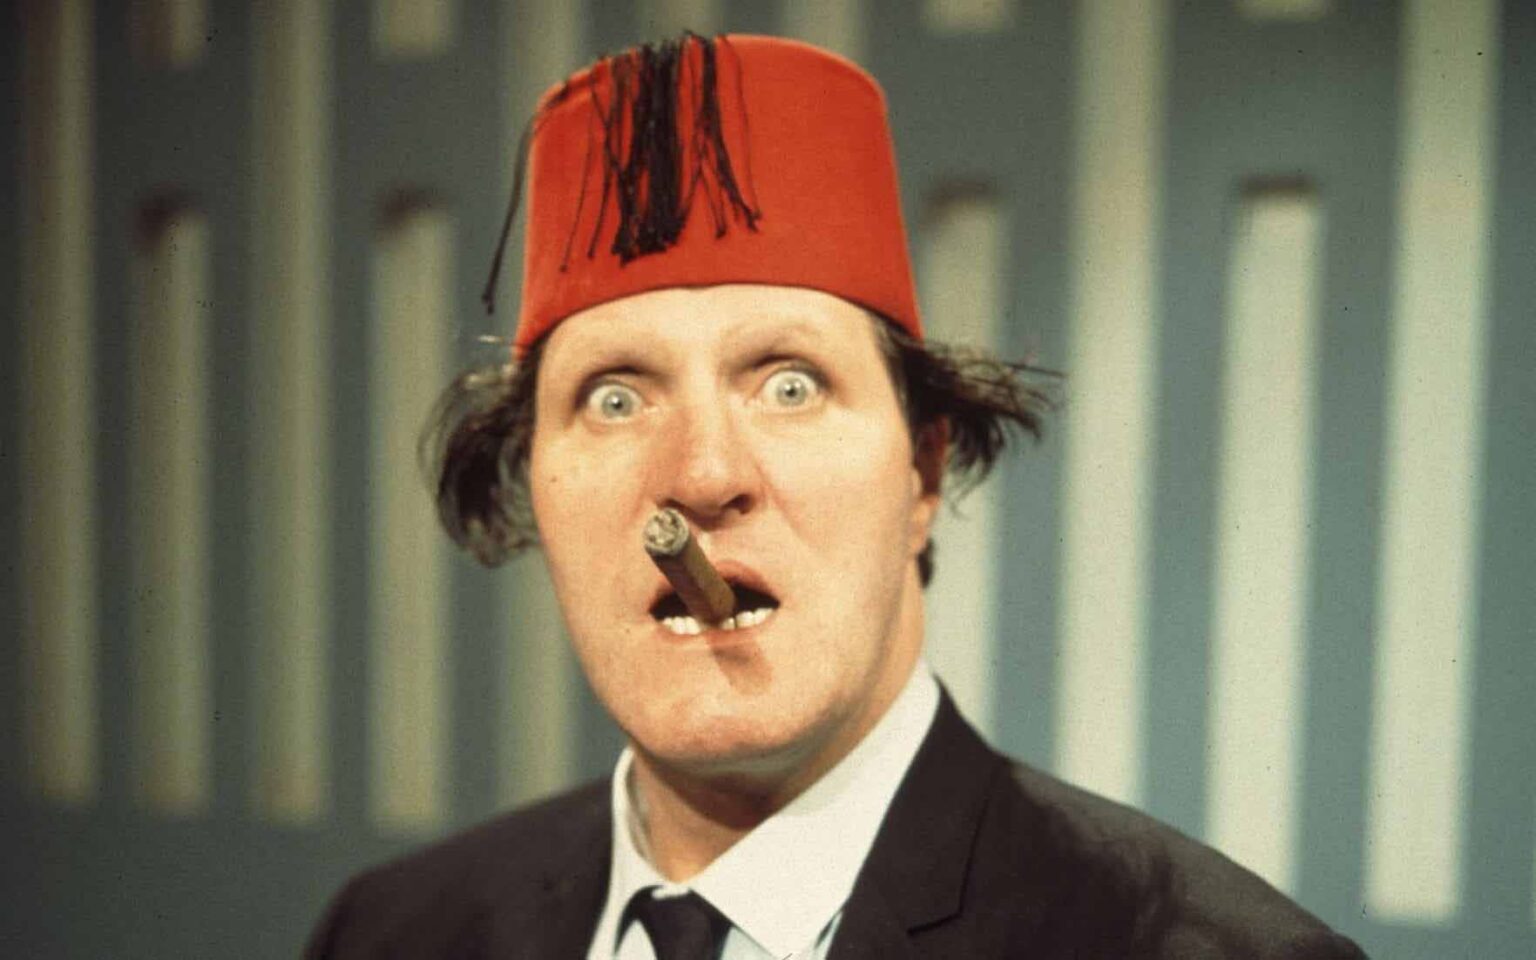 Tommy Cooper was a Welsh magician and prop comedian from the 1940s to the 1980s. Here's the tragic story of his death.